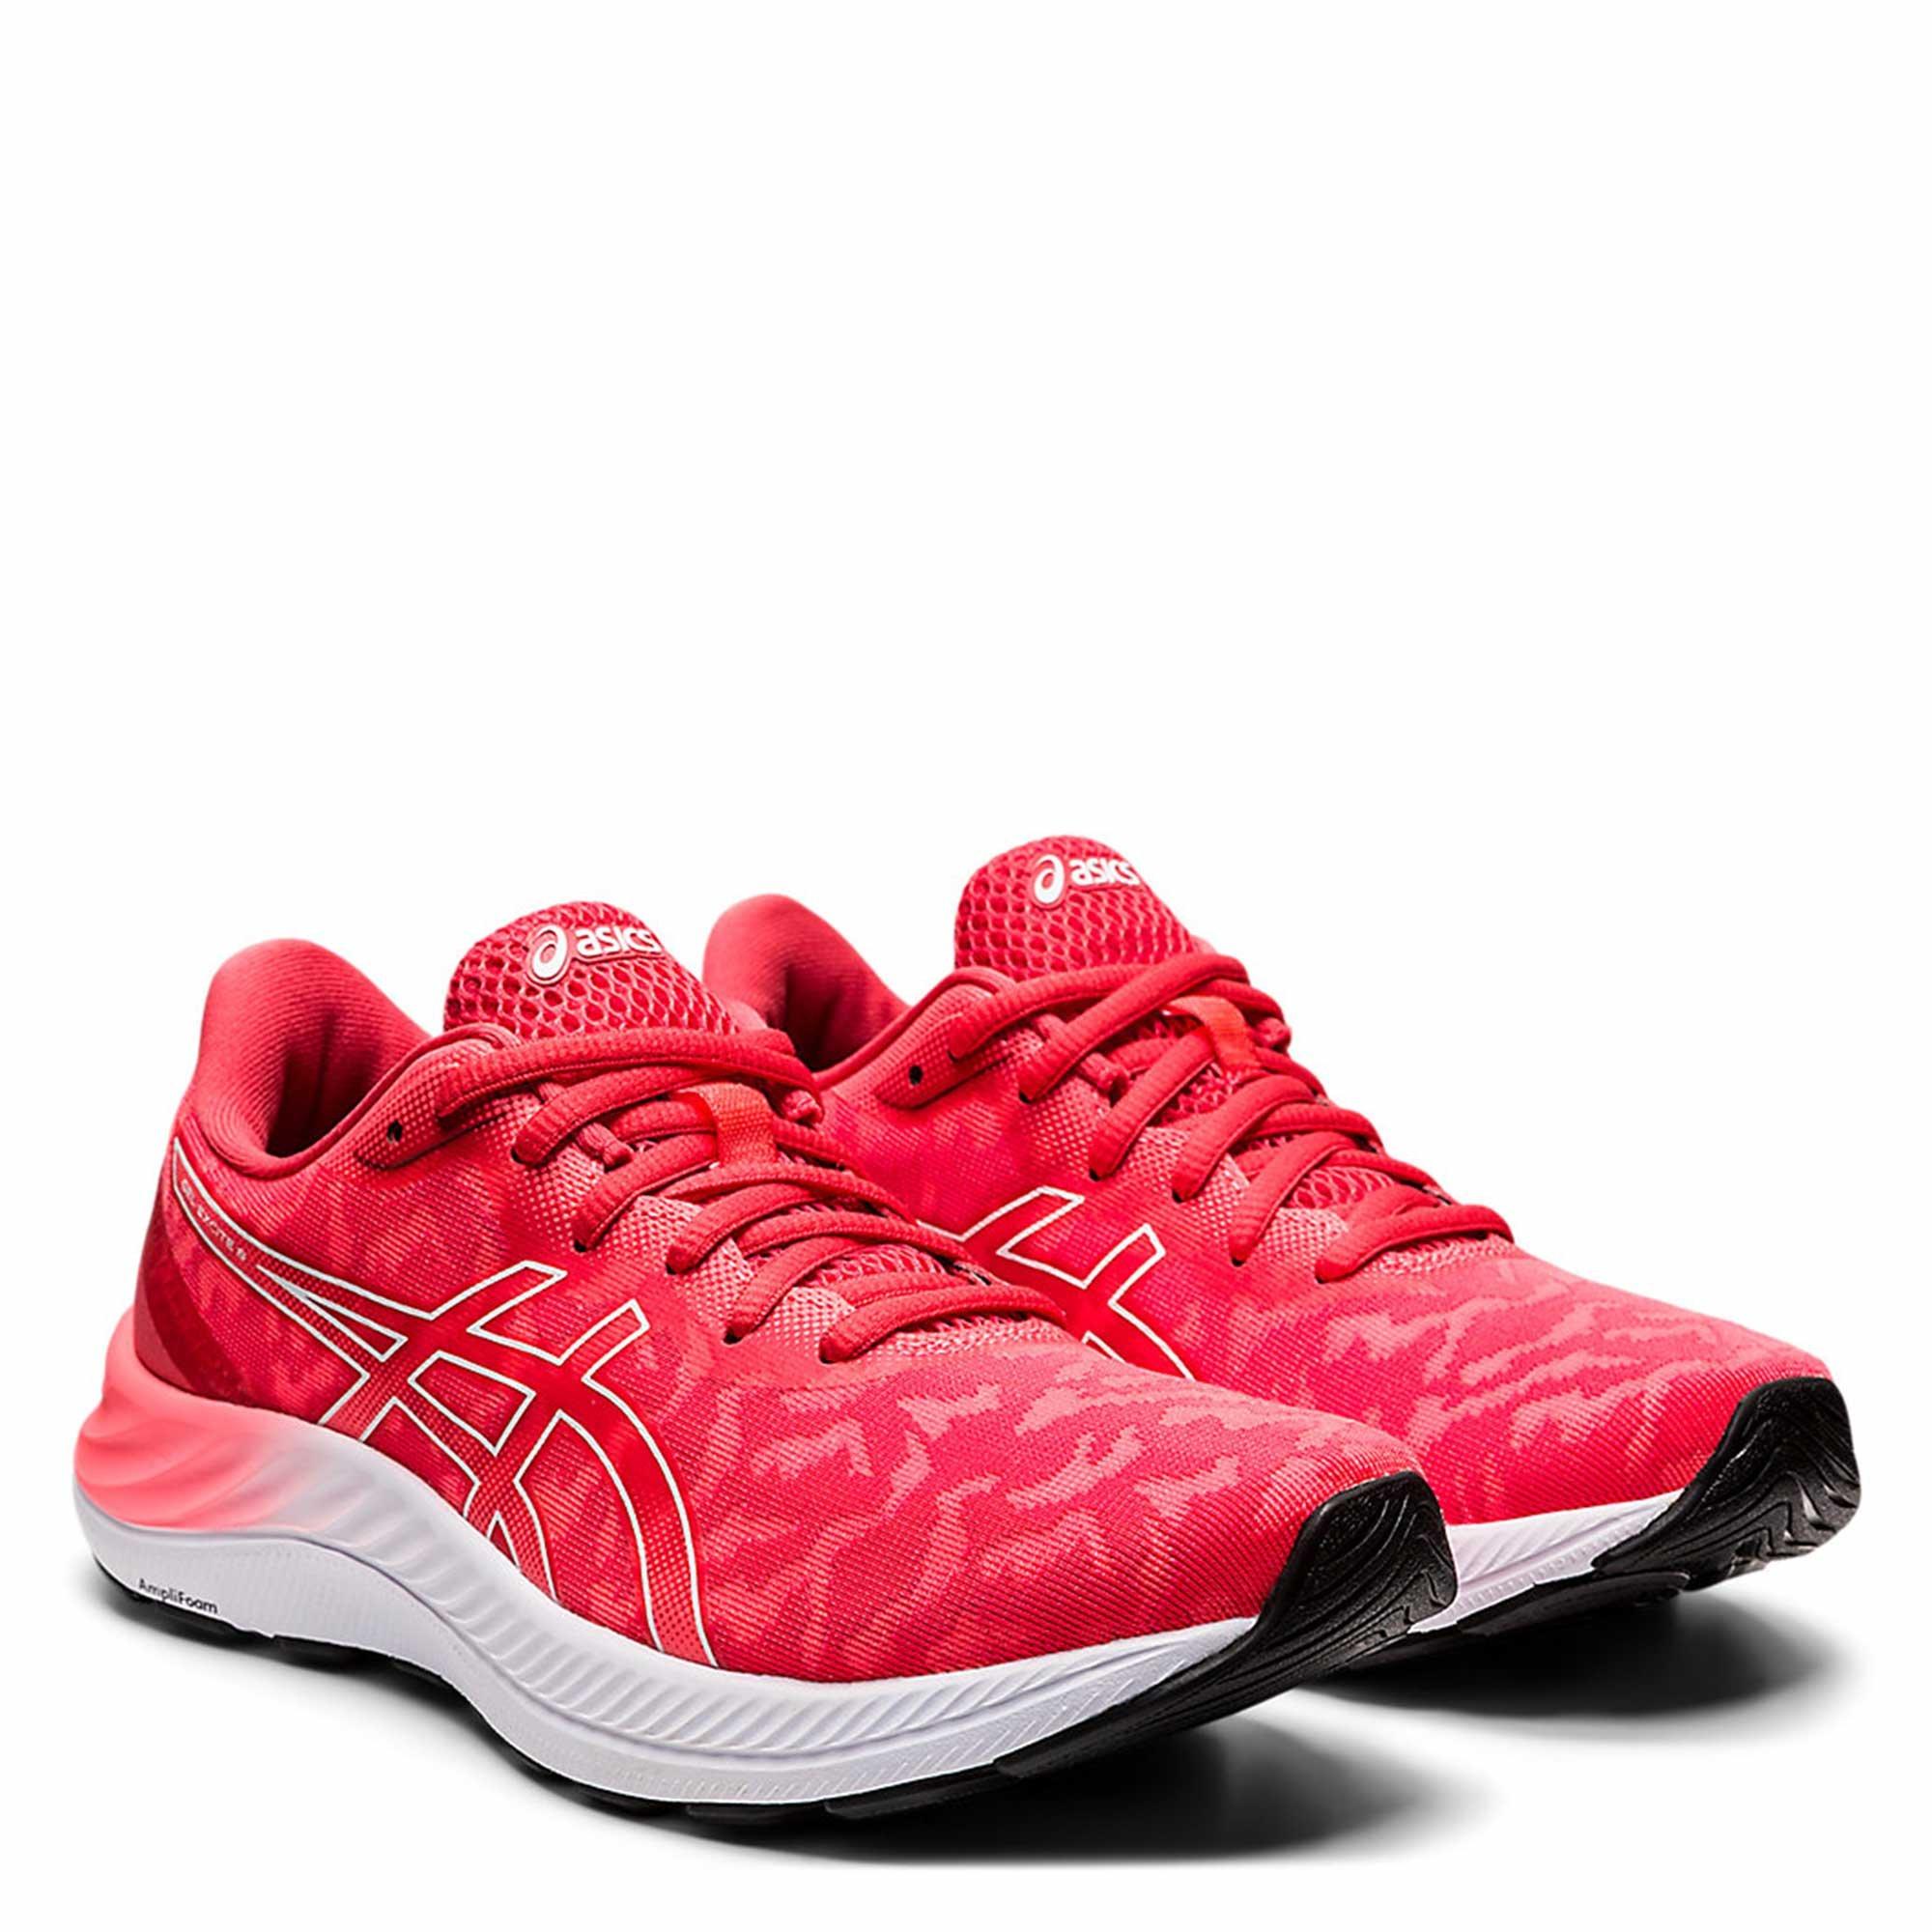 Asics | GEL Excite 8 Twist Womens Running Shoes | Everyday Neutral Road ...